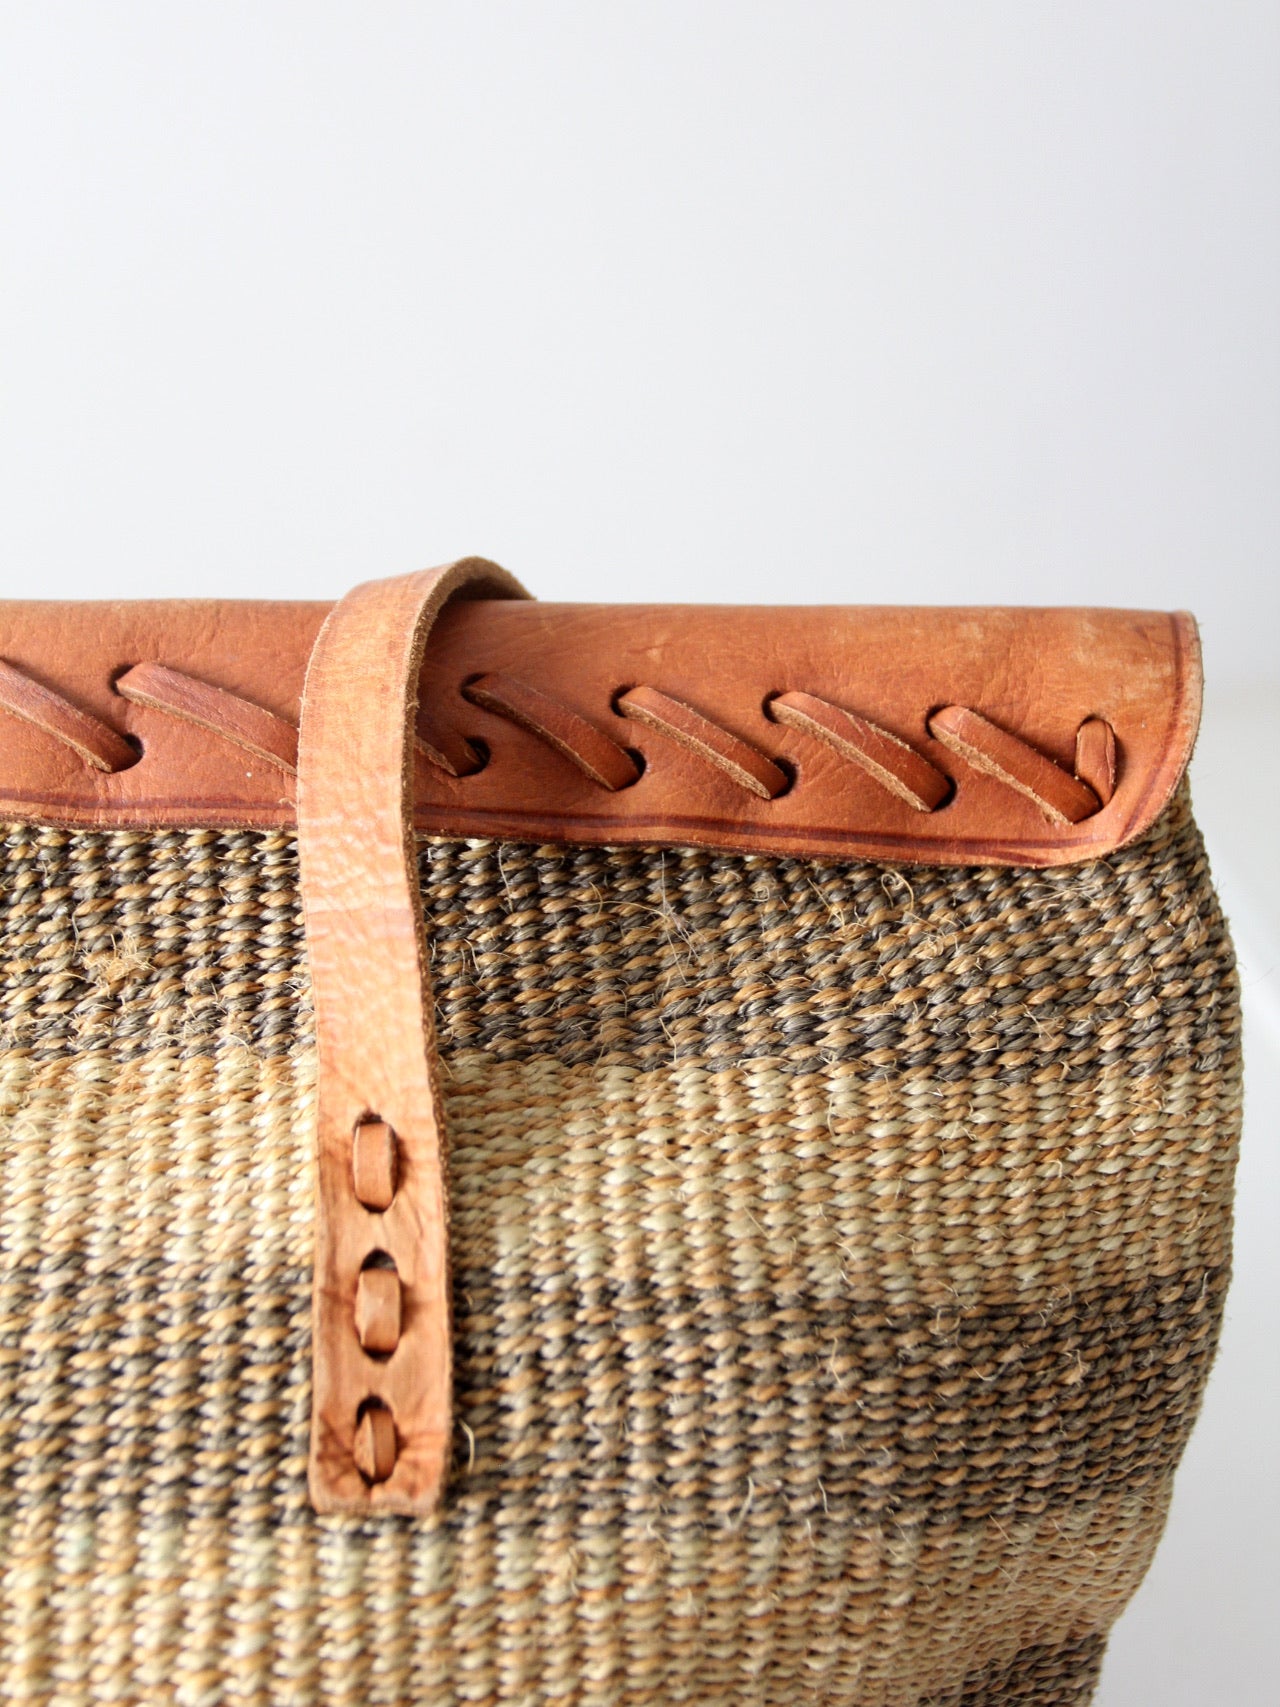 Sisal bag,wooven bag, Tote bag by joeycrafts - Tote bags and beach bags -  Afrikrea